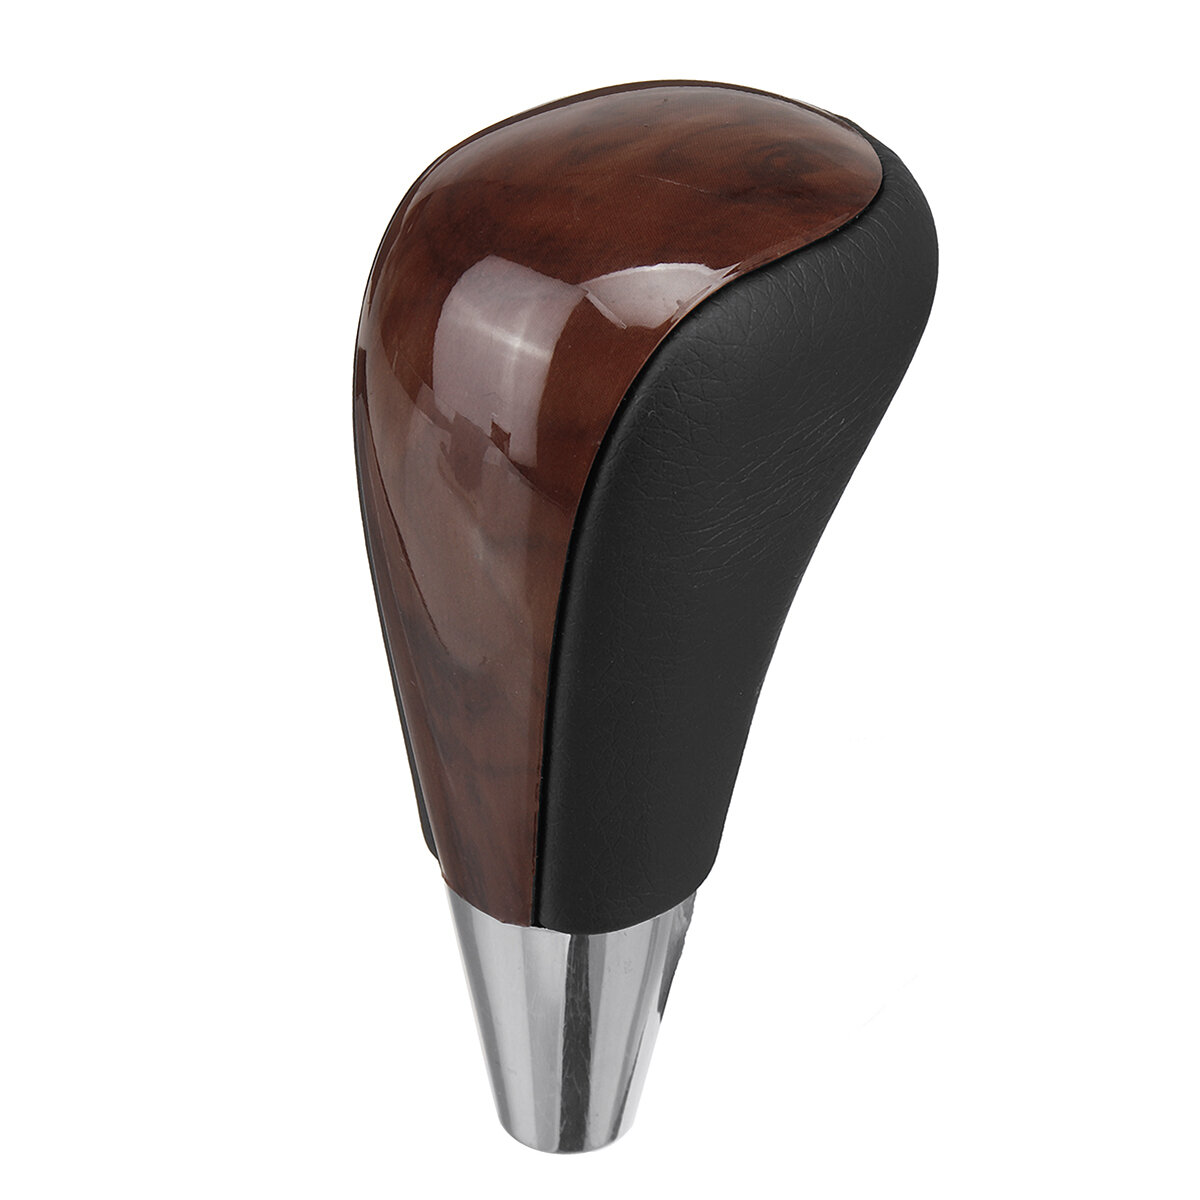 Automatic Gear Shift Knob Shiter Car Fit For TOYOTA/HARRIER/FORTUNER/LEXUS, Banggood  - buy with discount